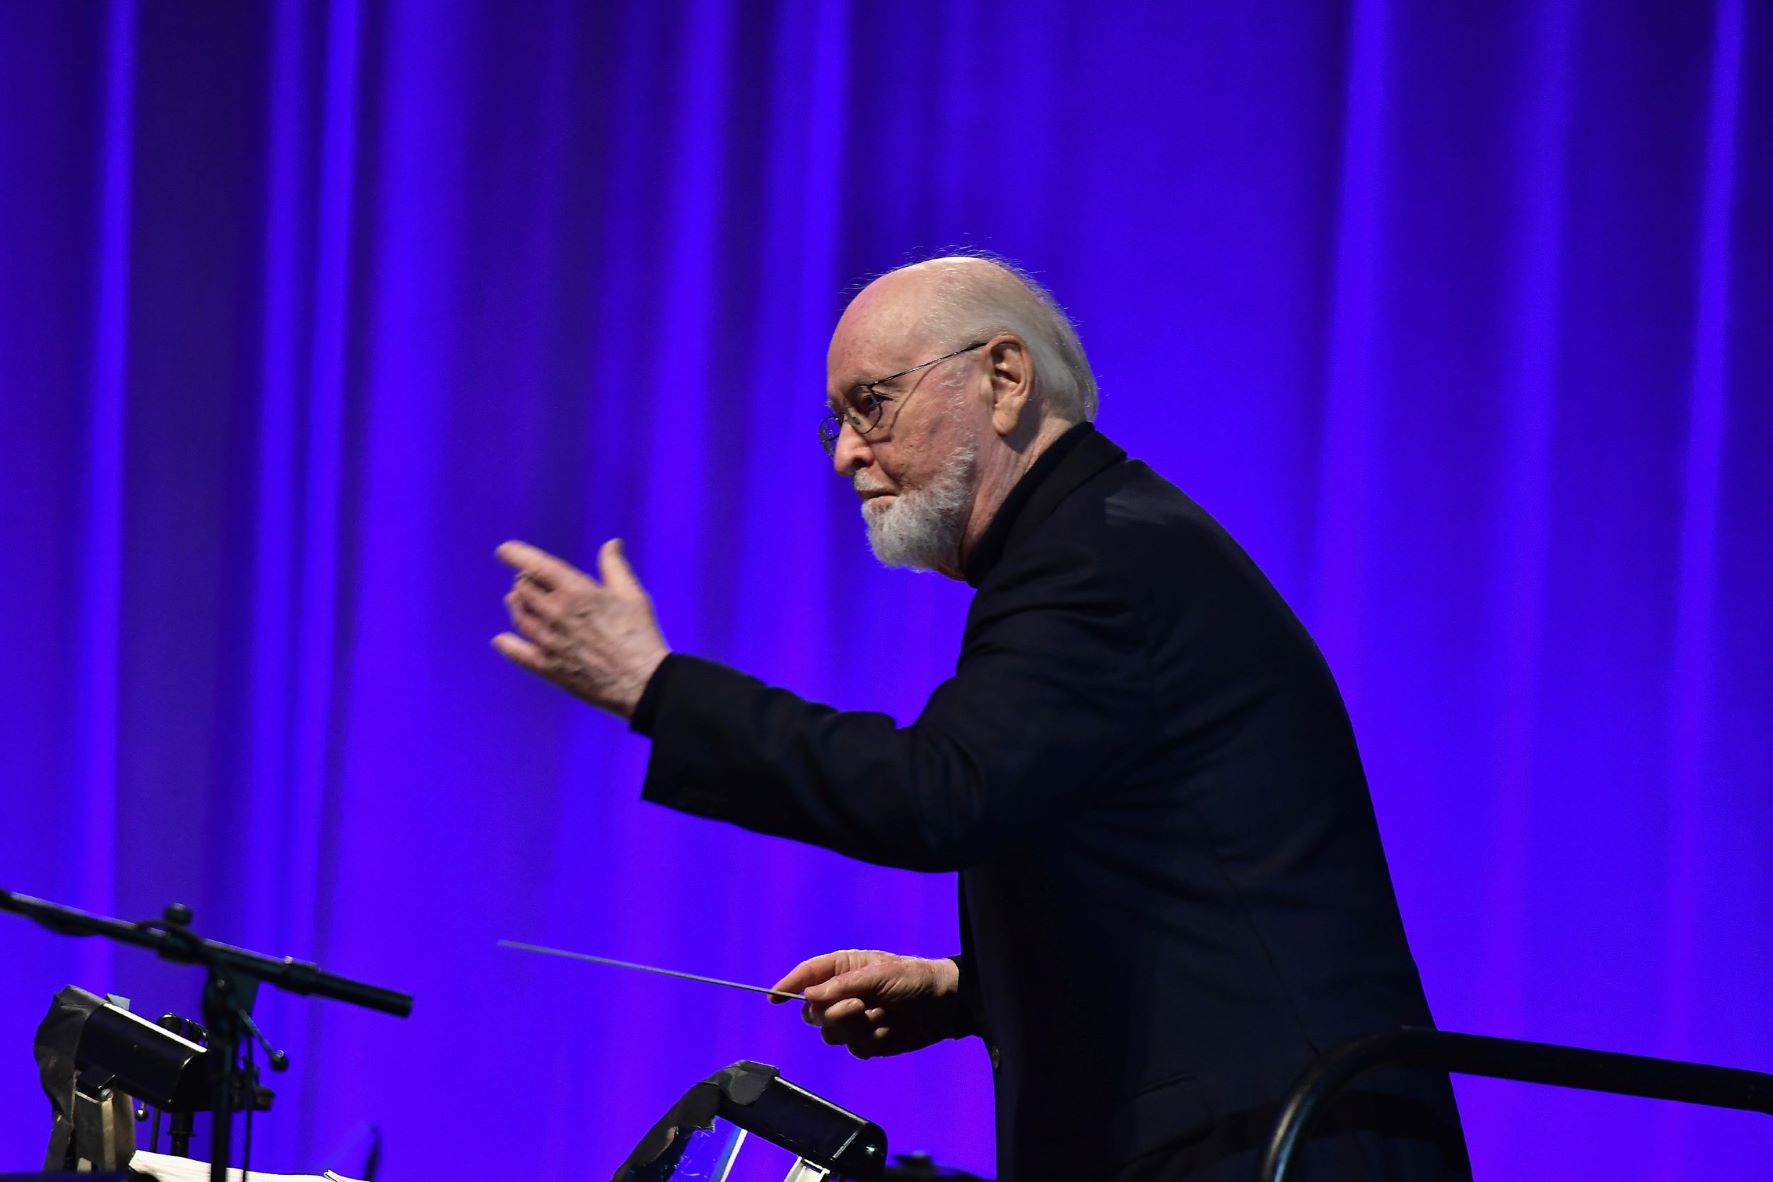 John Williams has conducted most of the Star Wars movies and can now be seen in a cameo in 'The Rise of Skywalker'